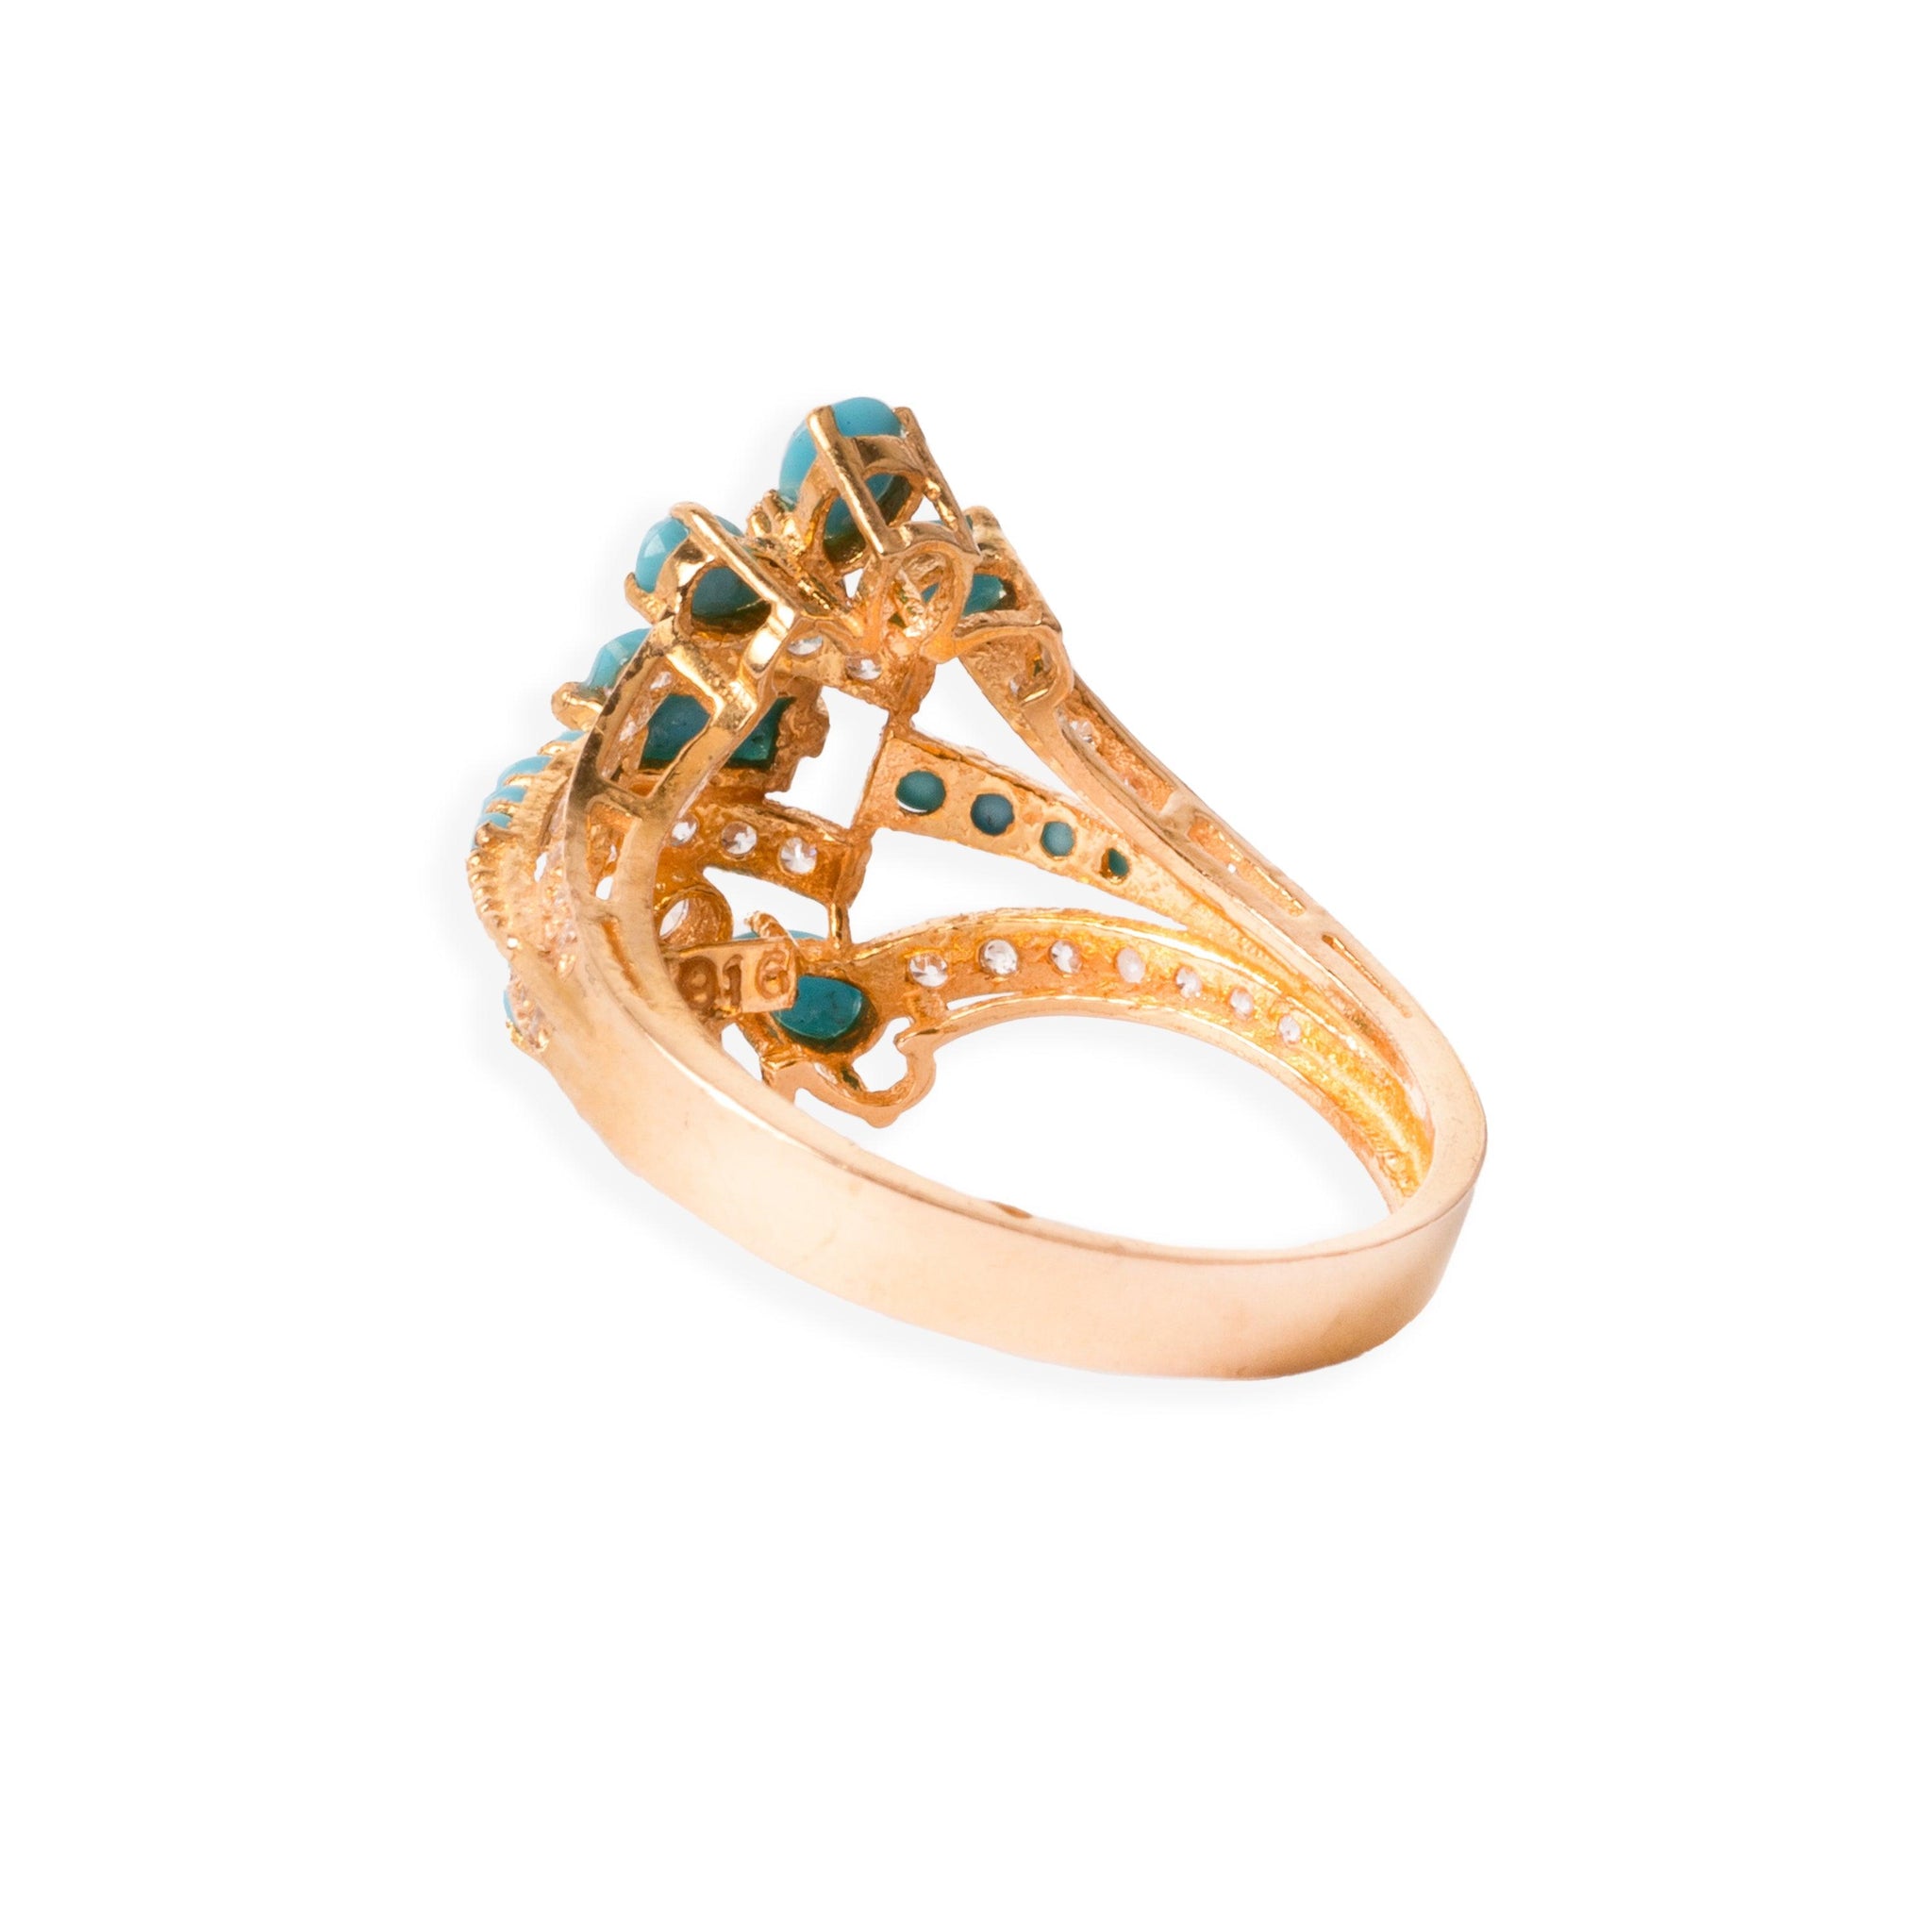 22ct Gold Cubic Zirconia and Turquoise Dress Ring (4.5g) LR-6553